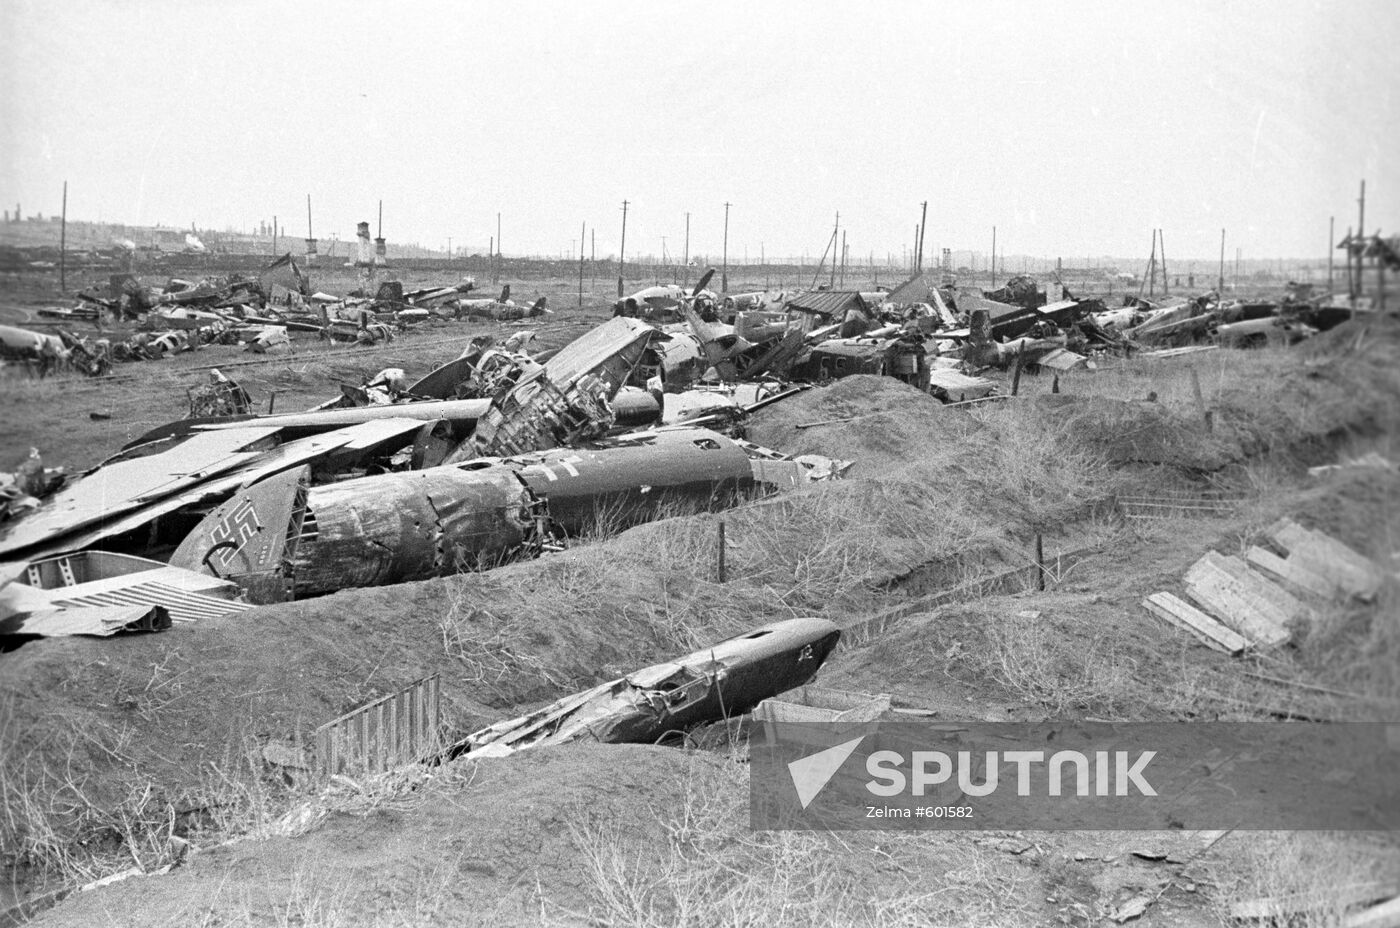 German aircraft shot down by Soviet forces